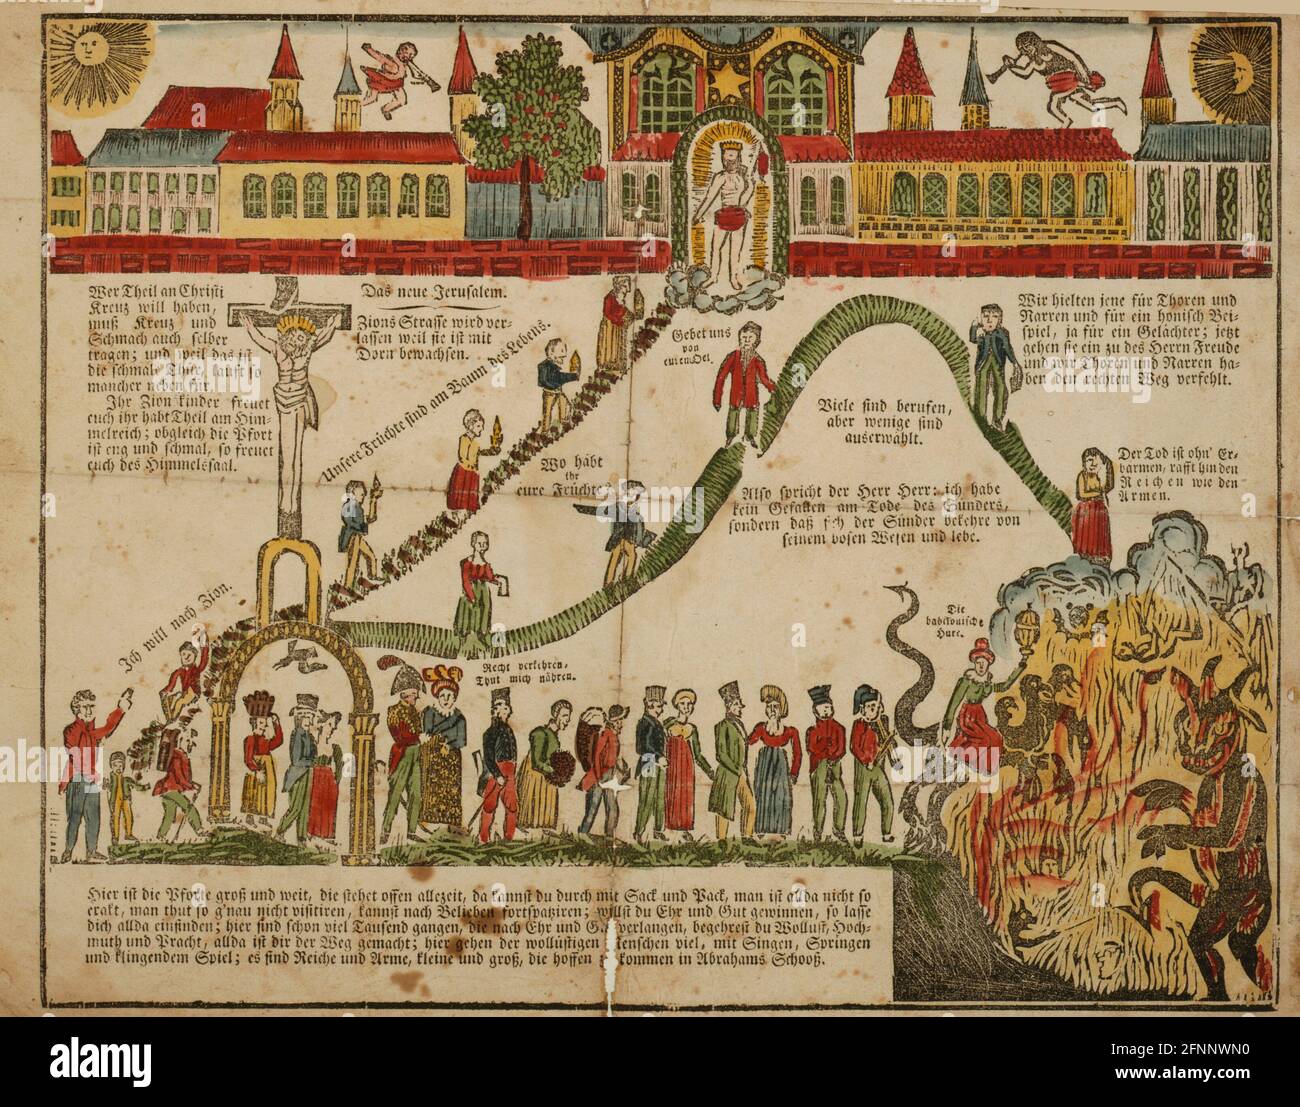 Das neue Jerusalem - Anonymous fraktur depicting the paths of good and evil - 1800s Stock Photo